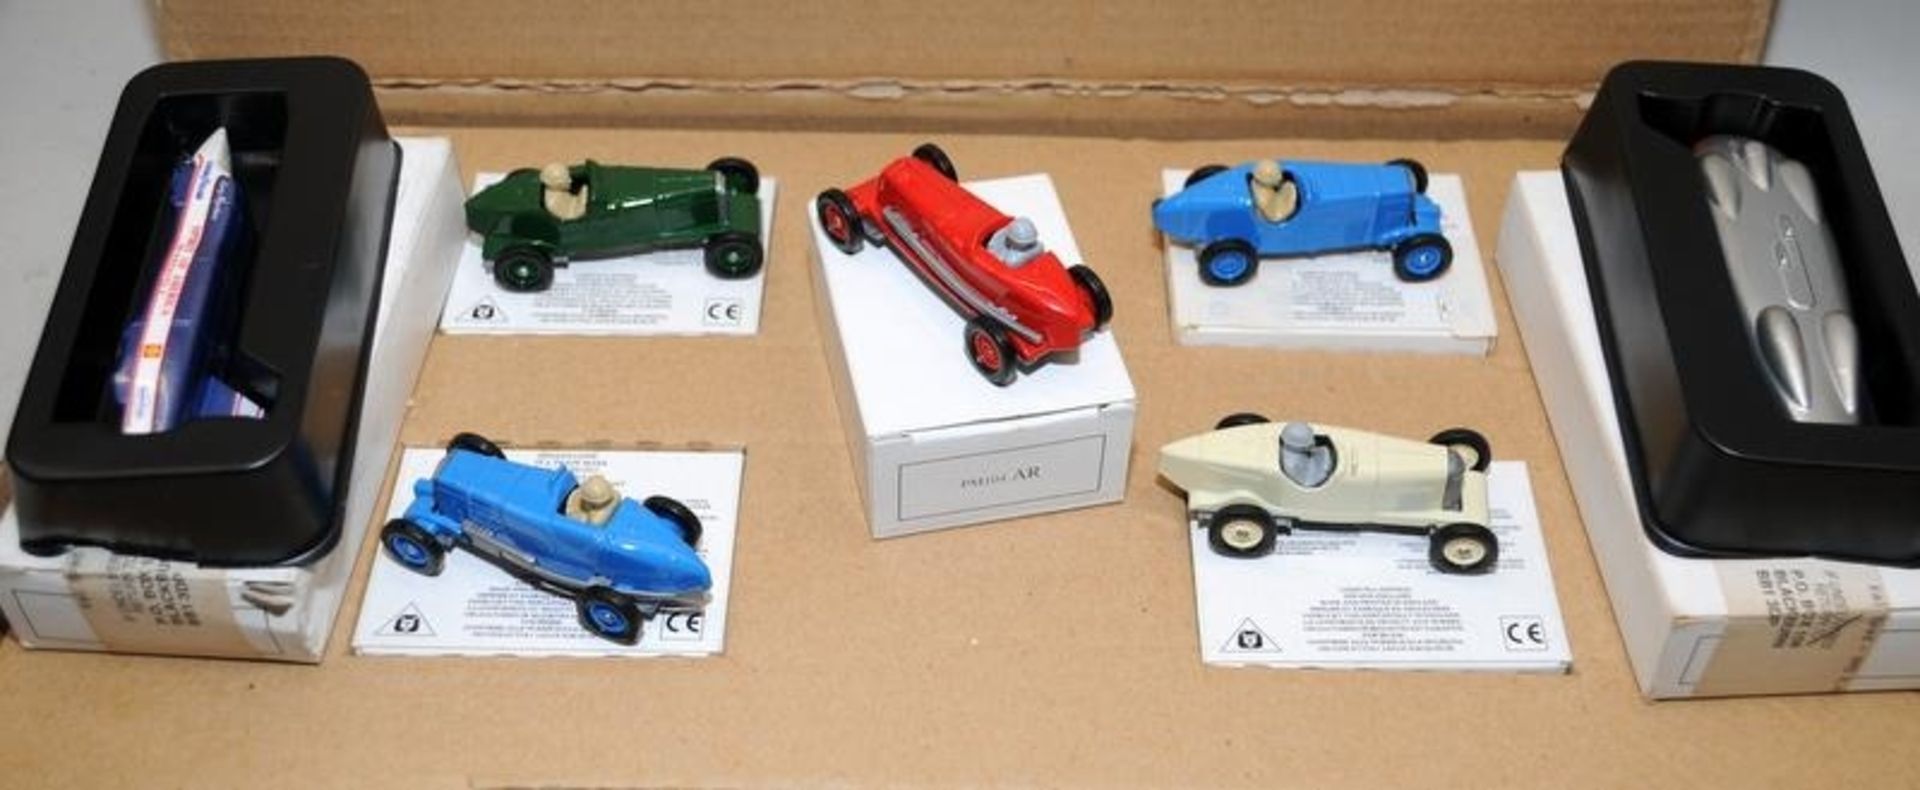 Lledo Kelloggs Land Speed Legends model car set c/w wall charts, press out card displays etc - Image 4 of 6